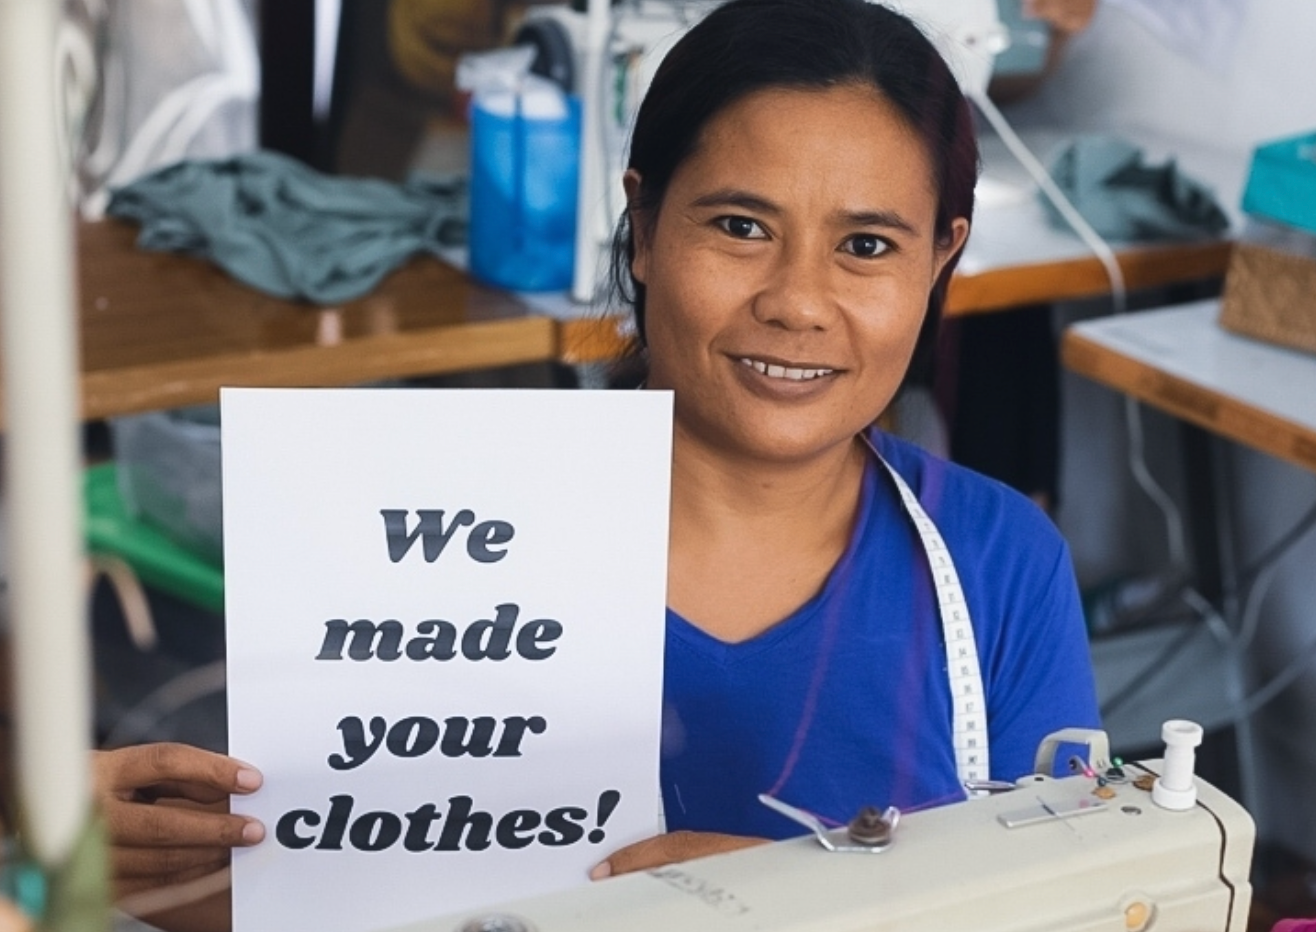 Ethical and sustainable manufacturer shows 'We made your clothes!' sign 